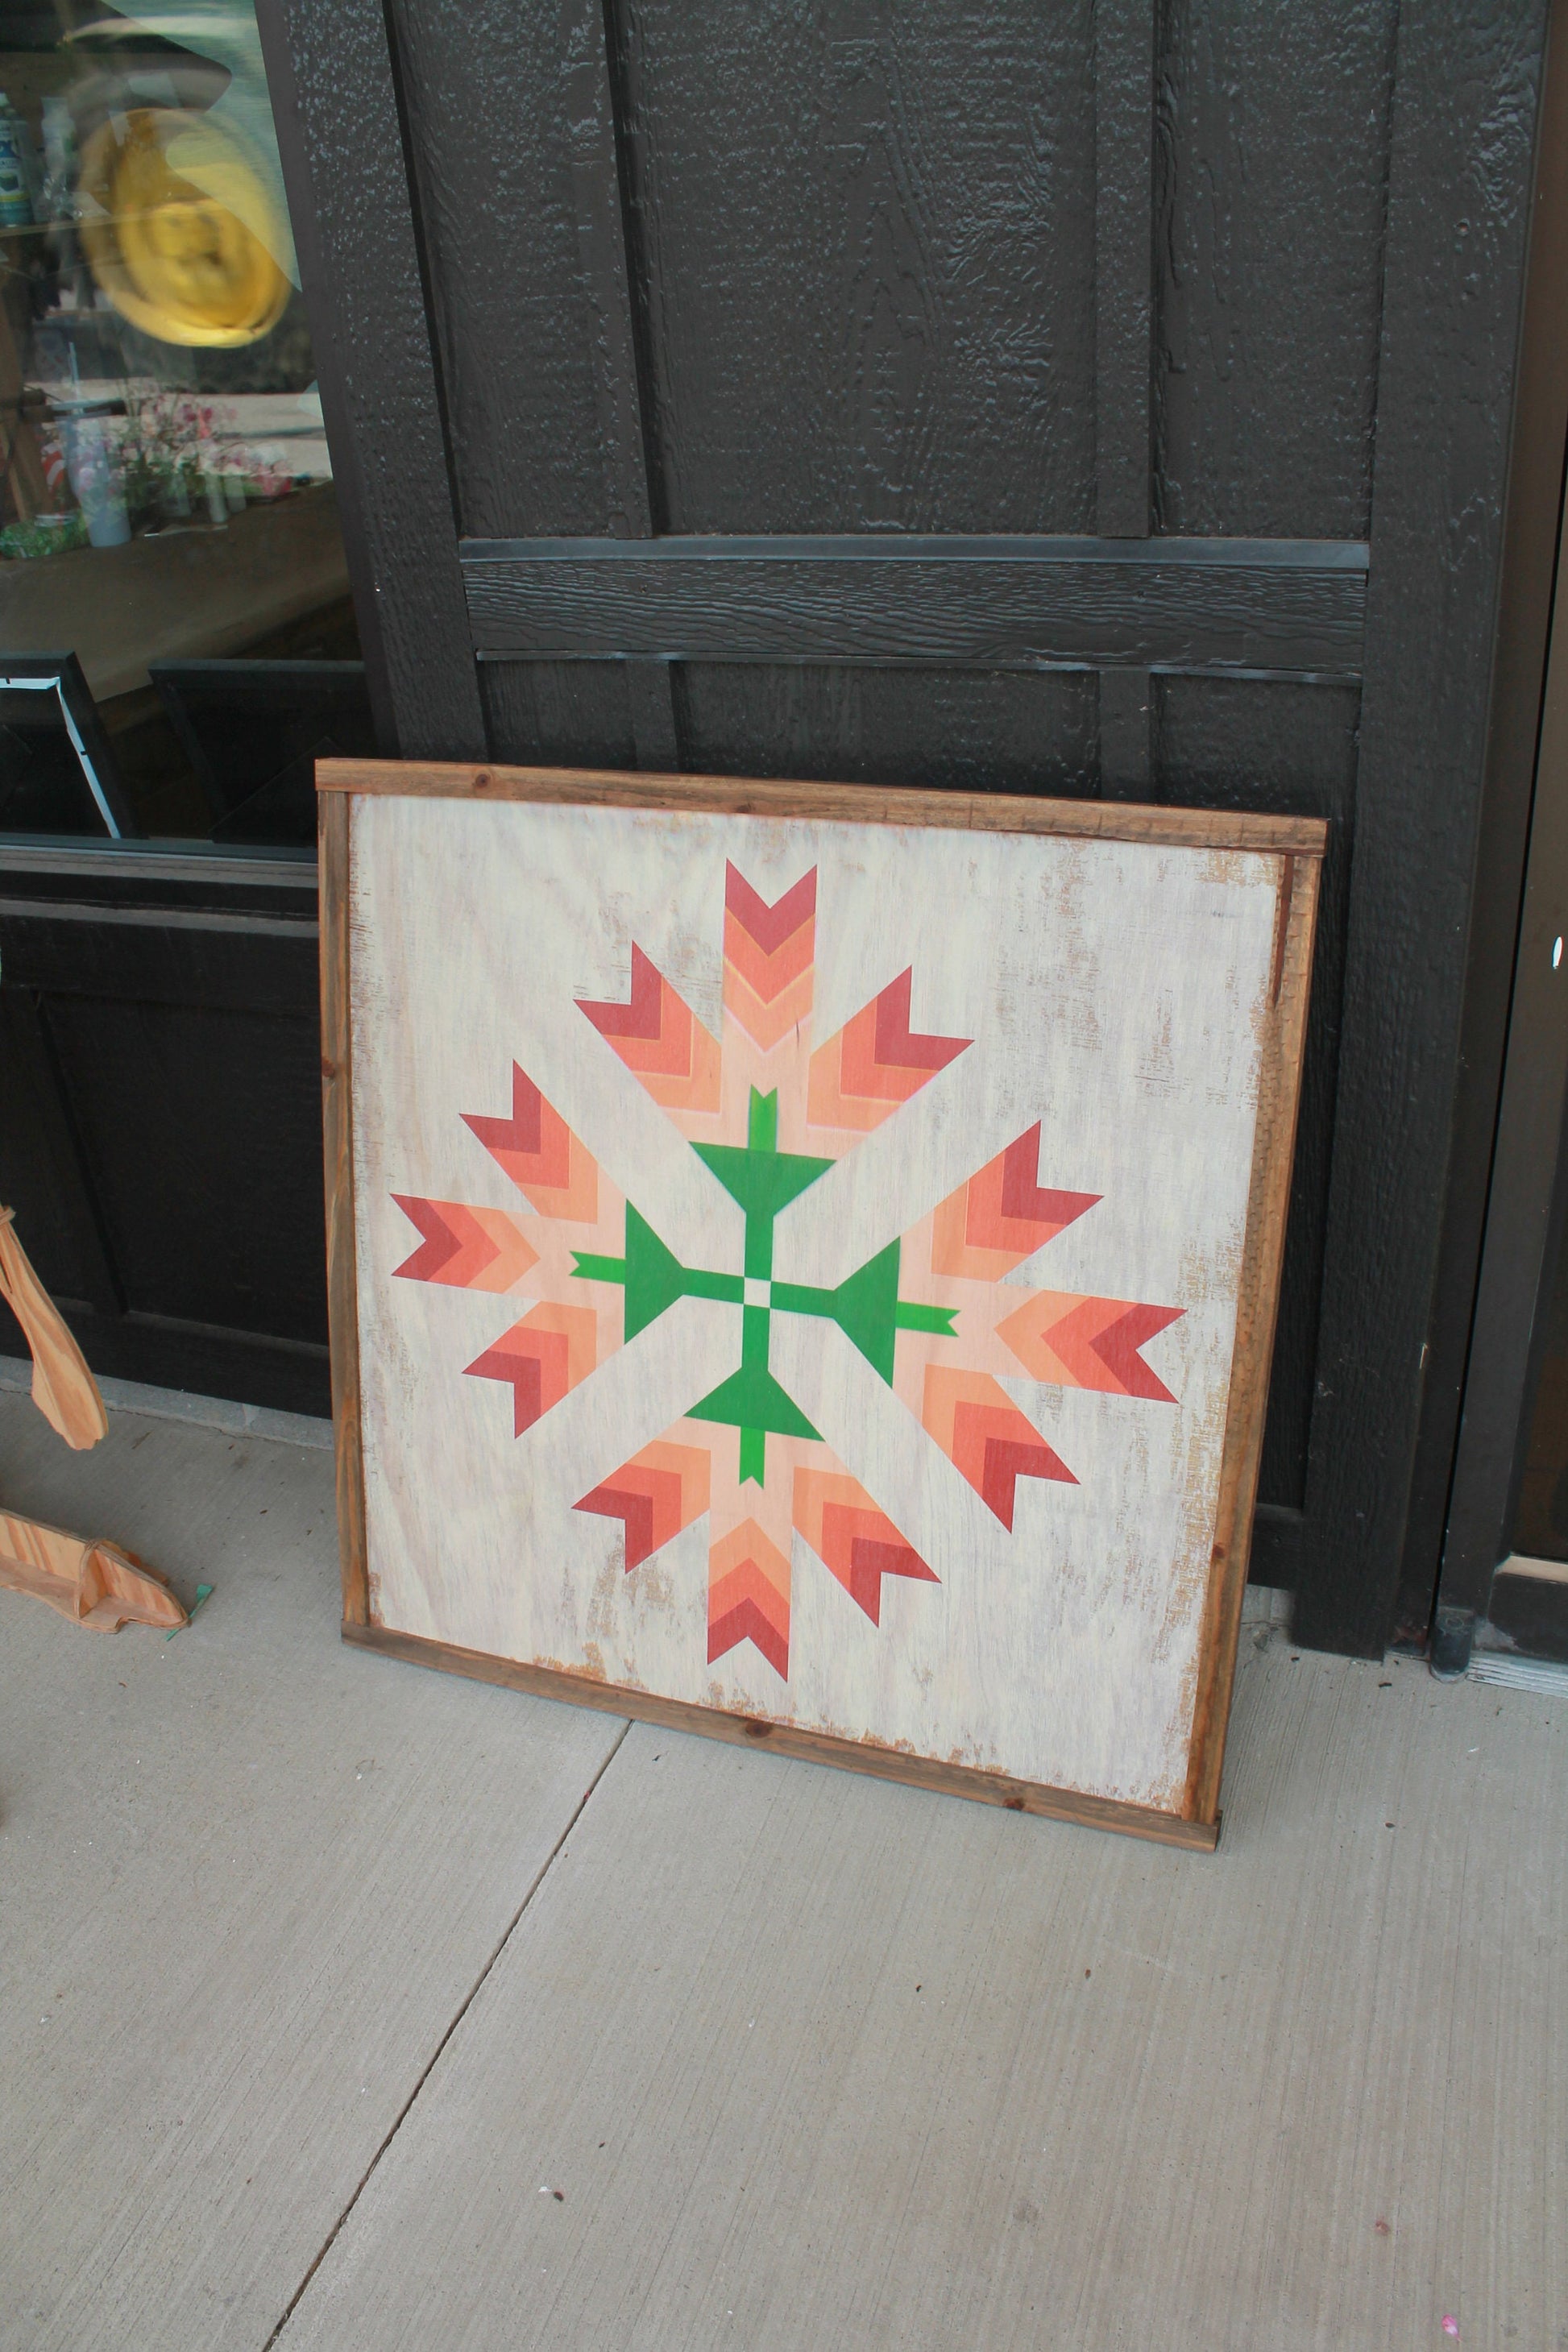 Tulip barn quilt primitive farm decor orange red and green white washmade from wood outdoor hang in garden star flower